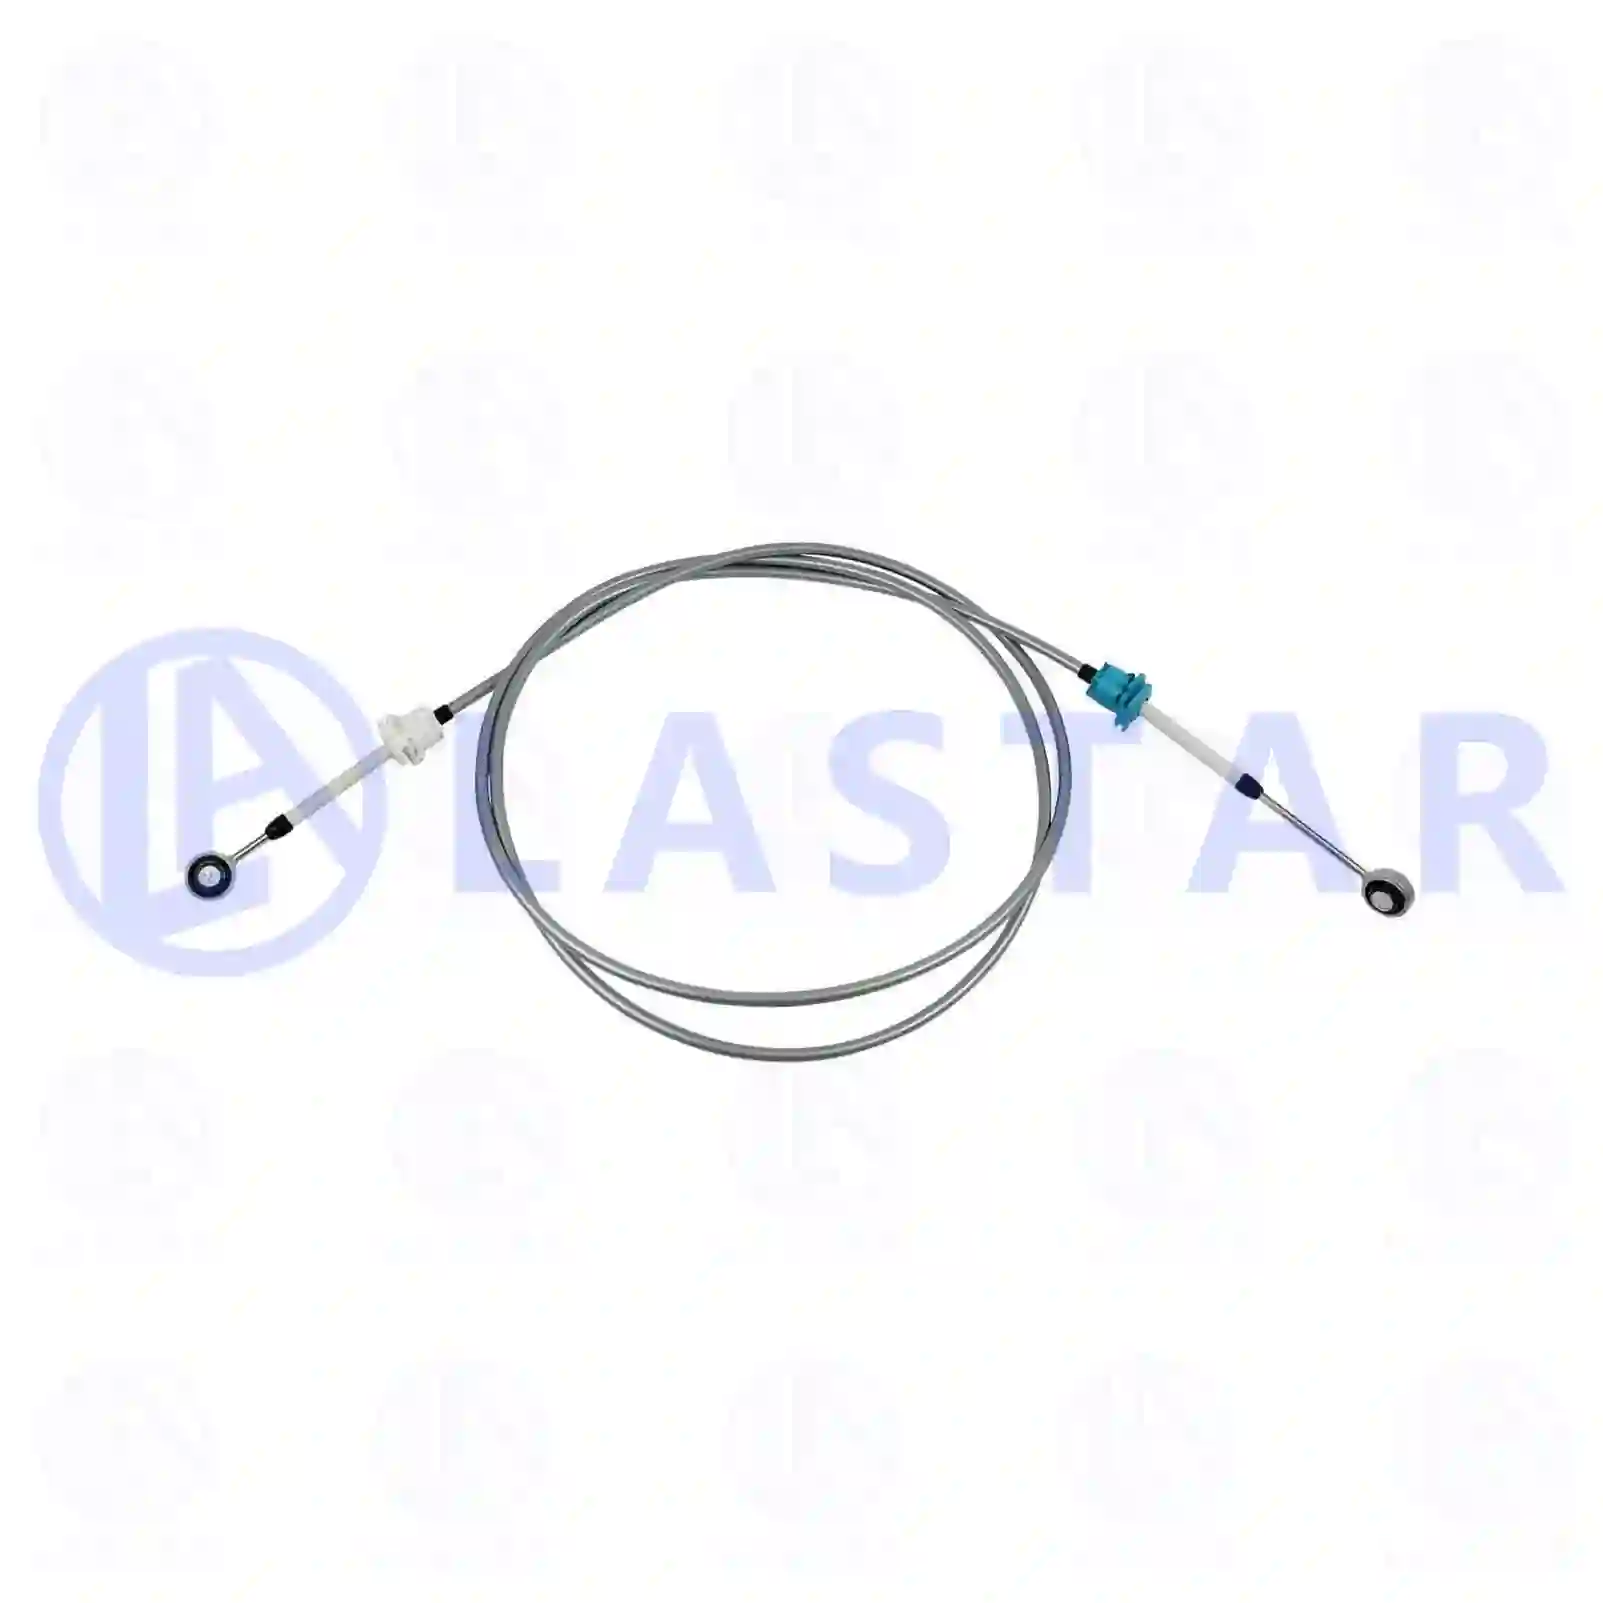 Control cable, switching, 77732421, 21002861, 21343561, 21789679 ||  77732421 Lastar Spare Part | Truck Spare Parts, Auotomotive Spare Parts Control cable, switching, 77732421, 21002861, 21343561, 21789679 ||  77732421 Lastar Spare Part | Truck Spare Parts, Auotomotive Spare Parts